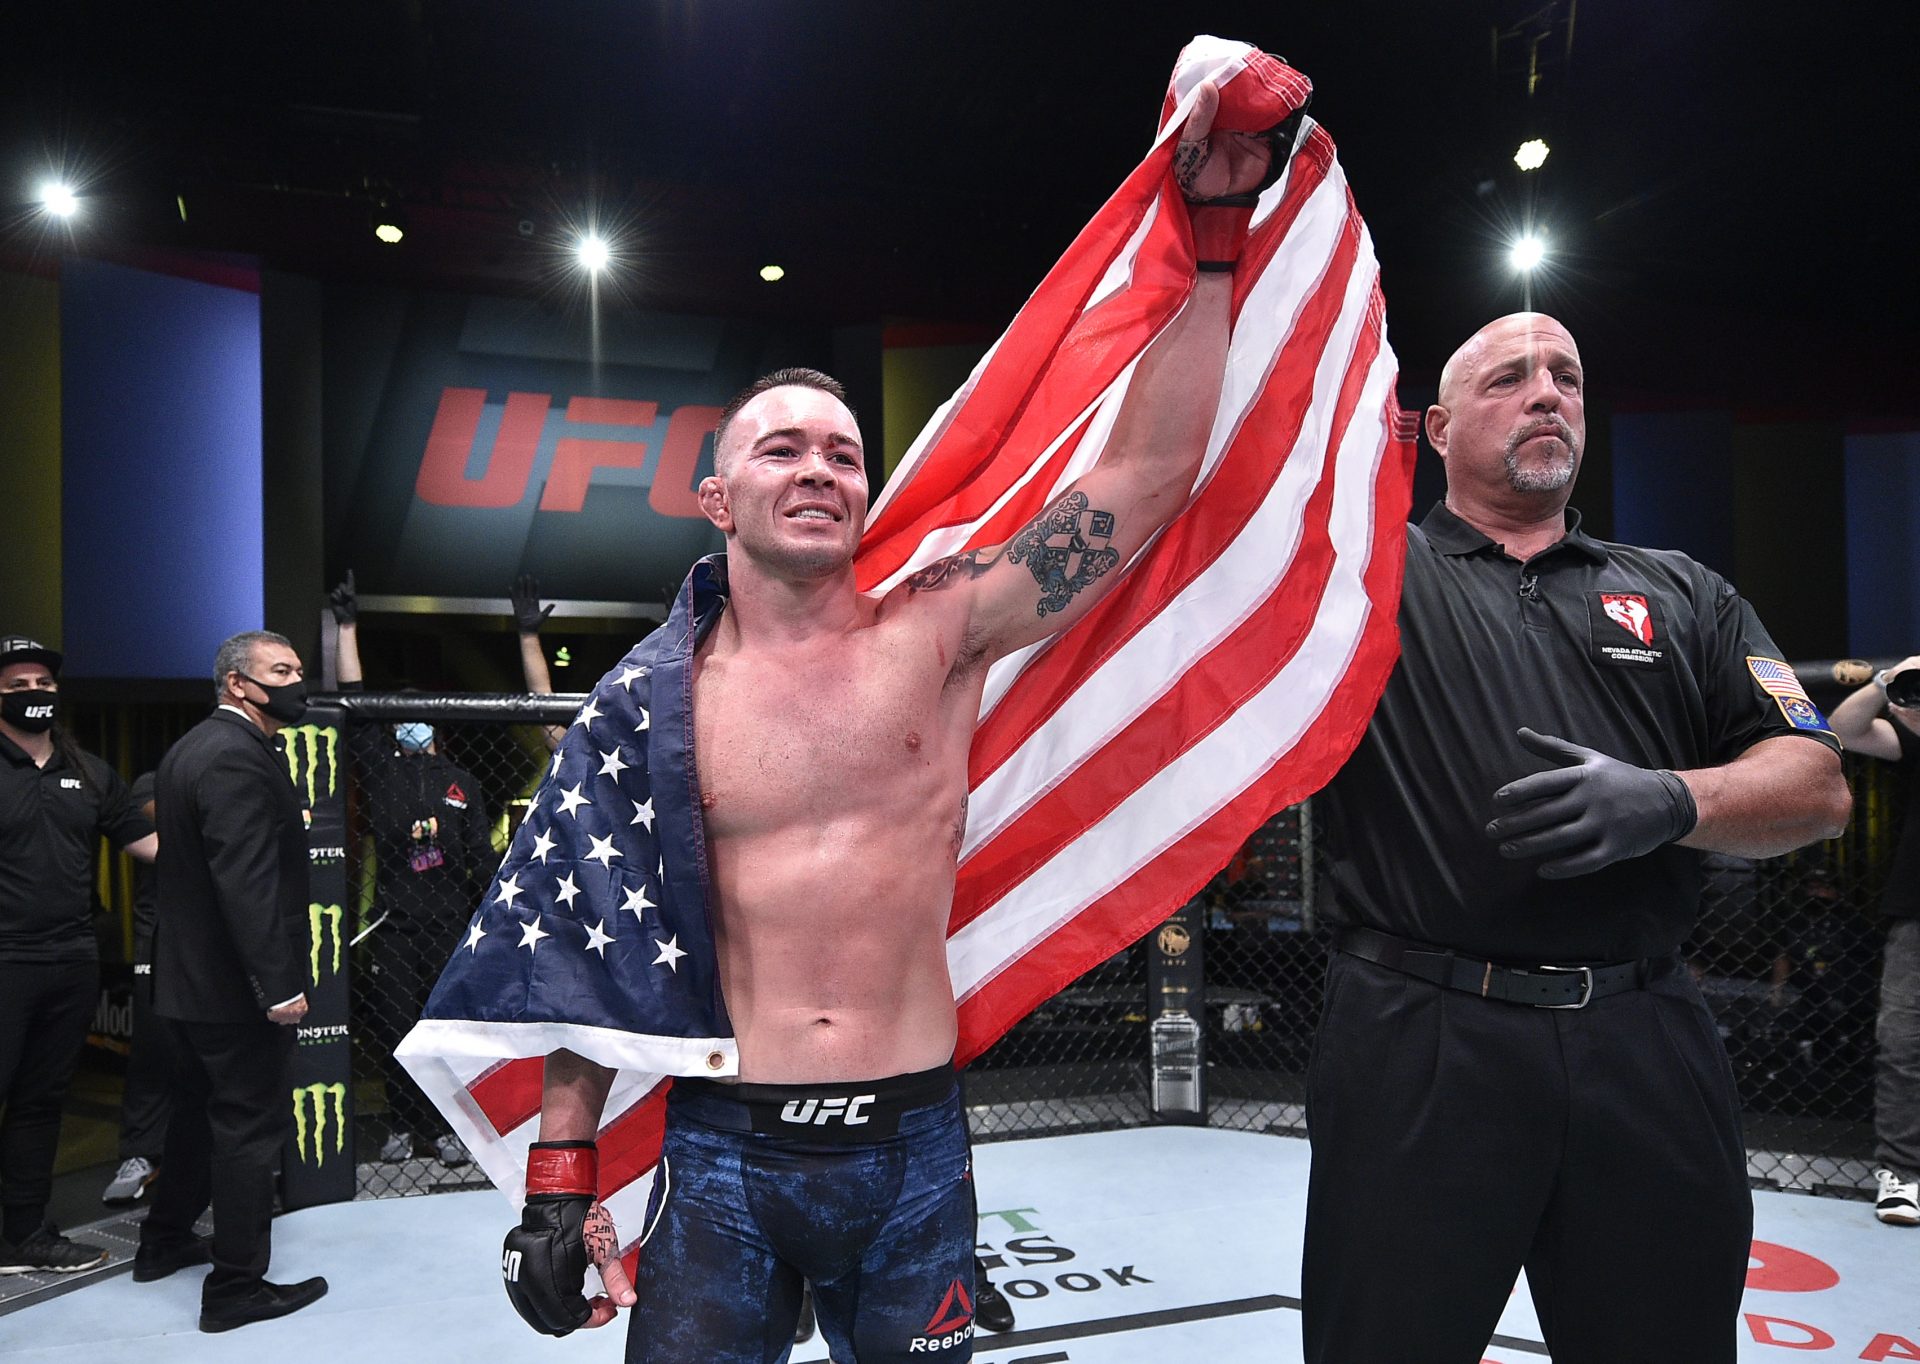 UFC on ESPN+ 36 outcomes: Colby Covington routs Tyron Woodley, wins on injury TKO